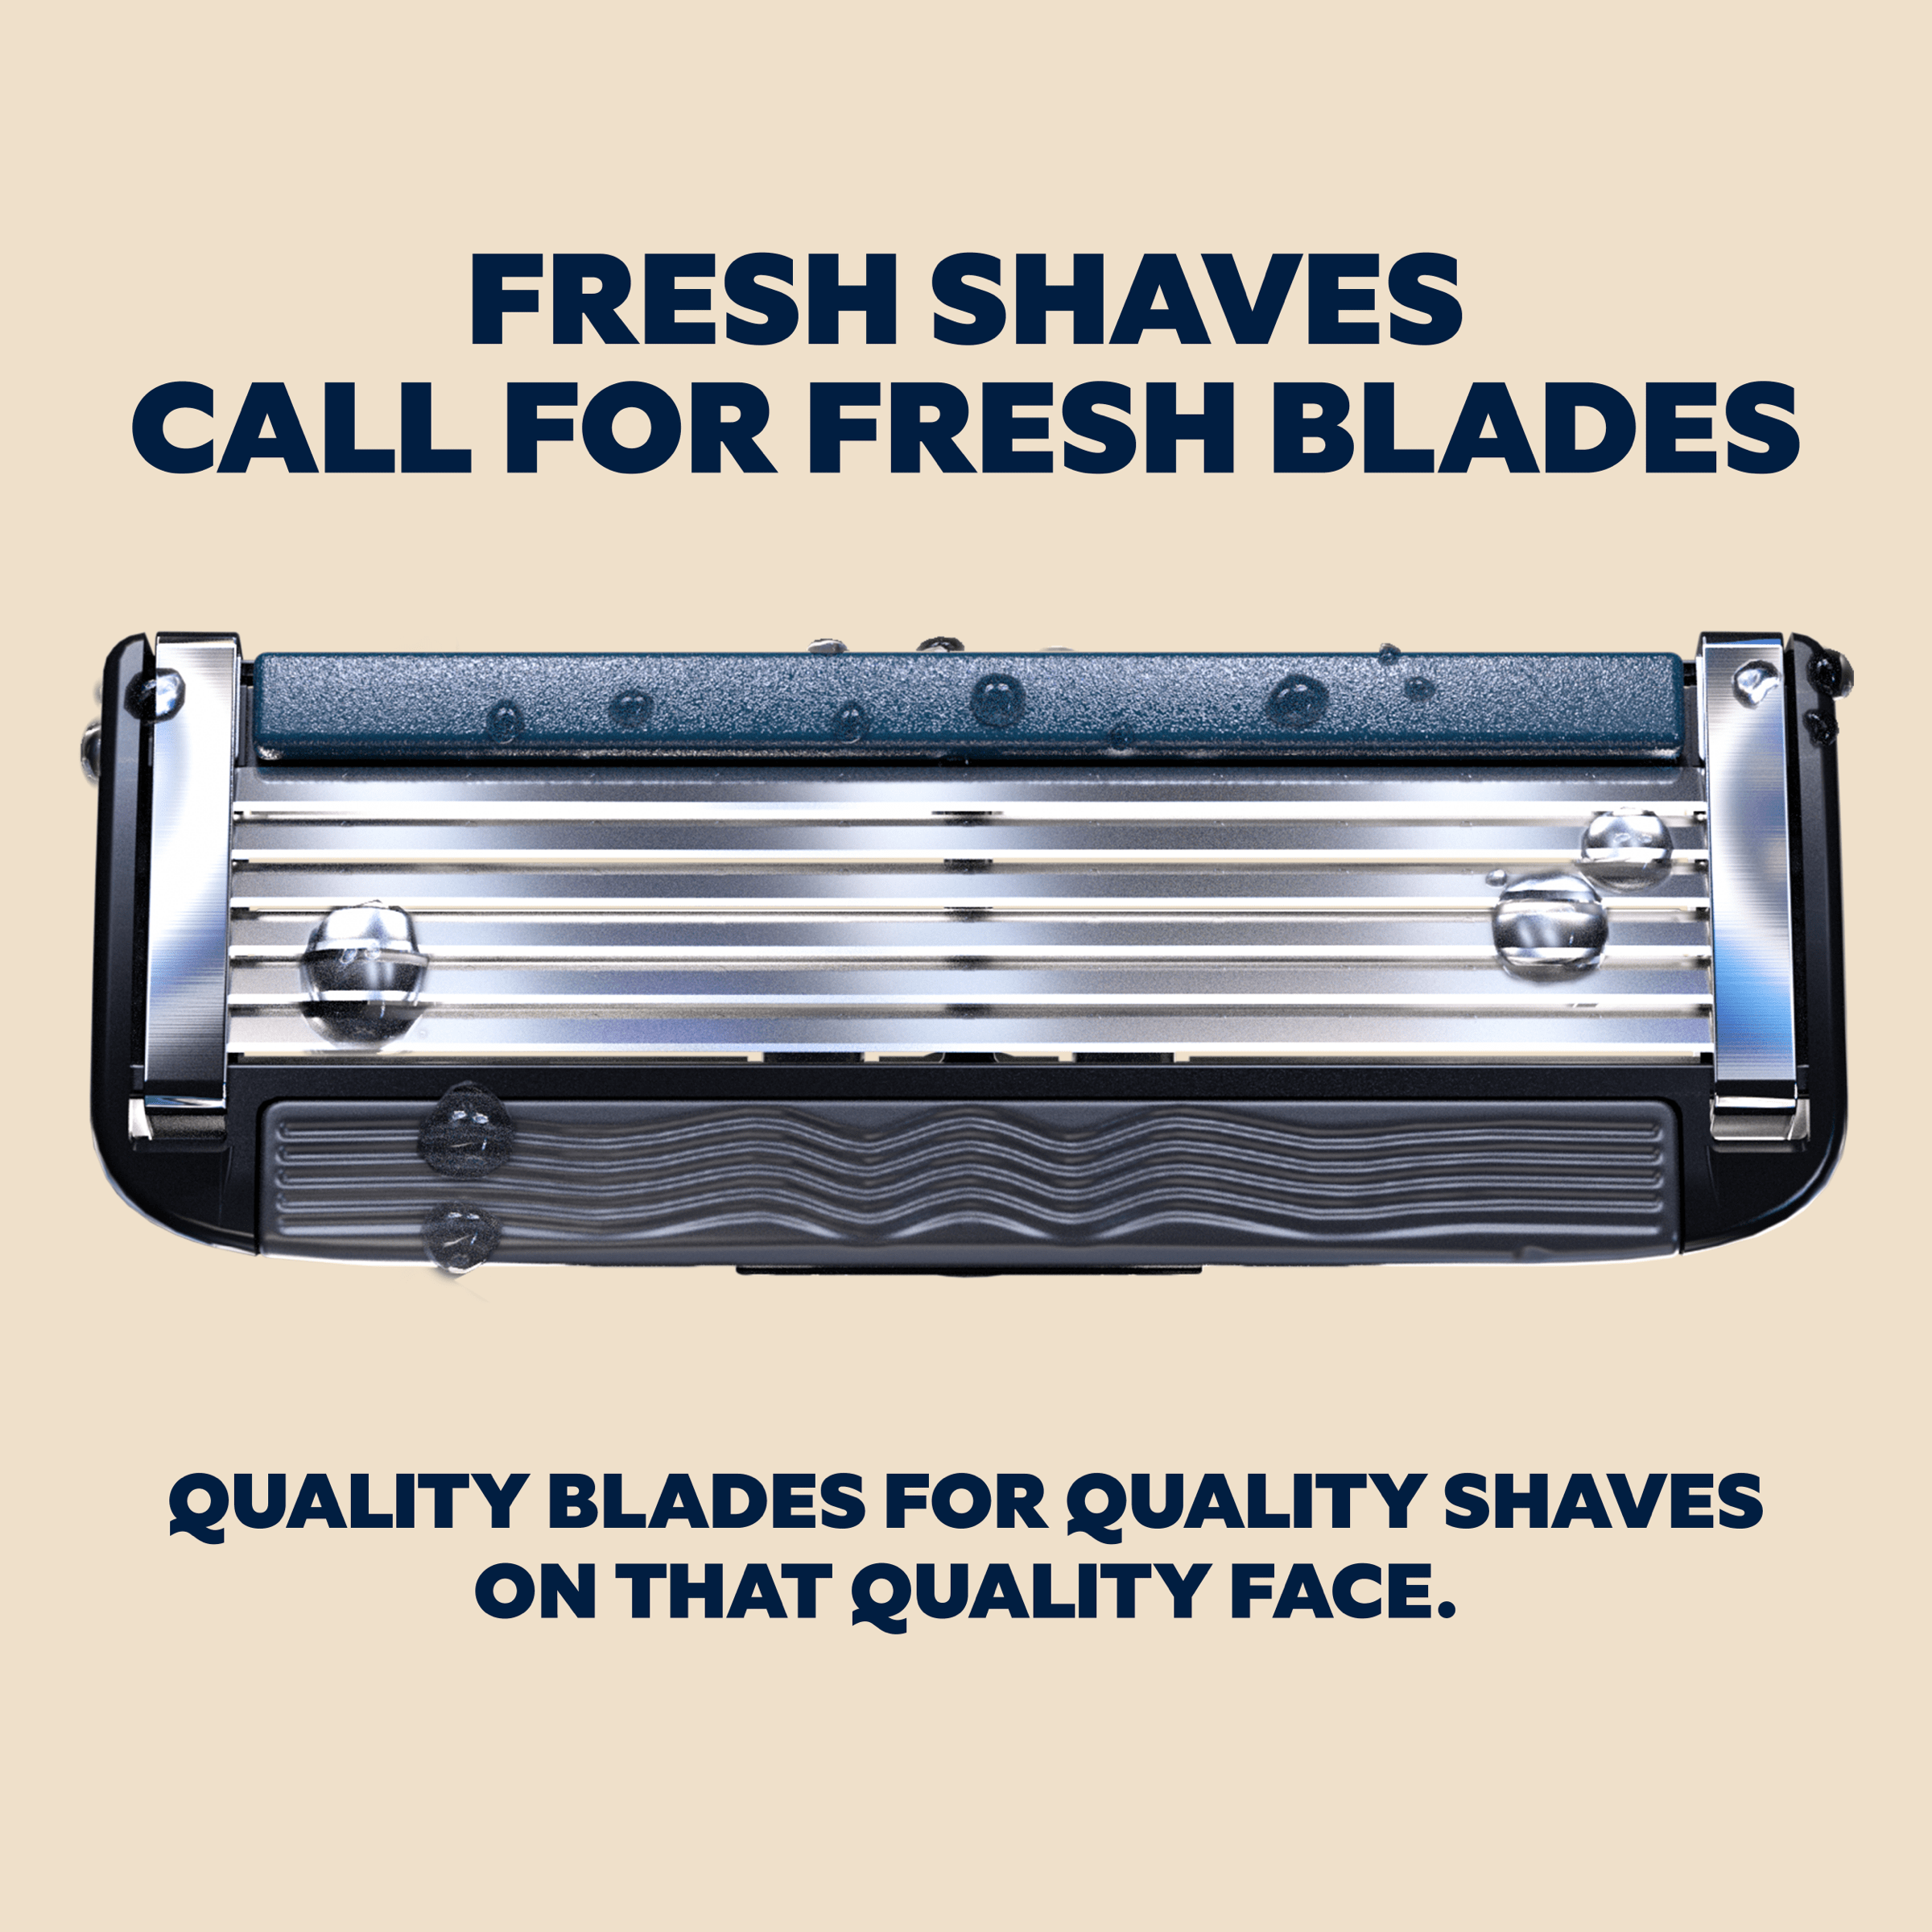 Dollar Shave Club Club Series Six blade razor benefits include precision trimmer bar, stainless steel blades, and moisturizing lube strip.